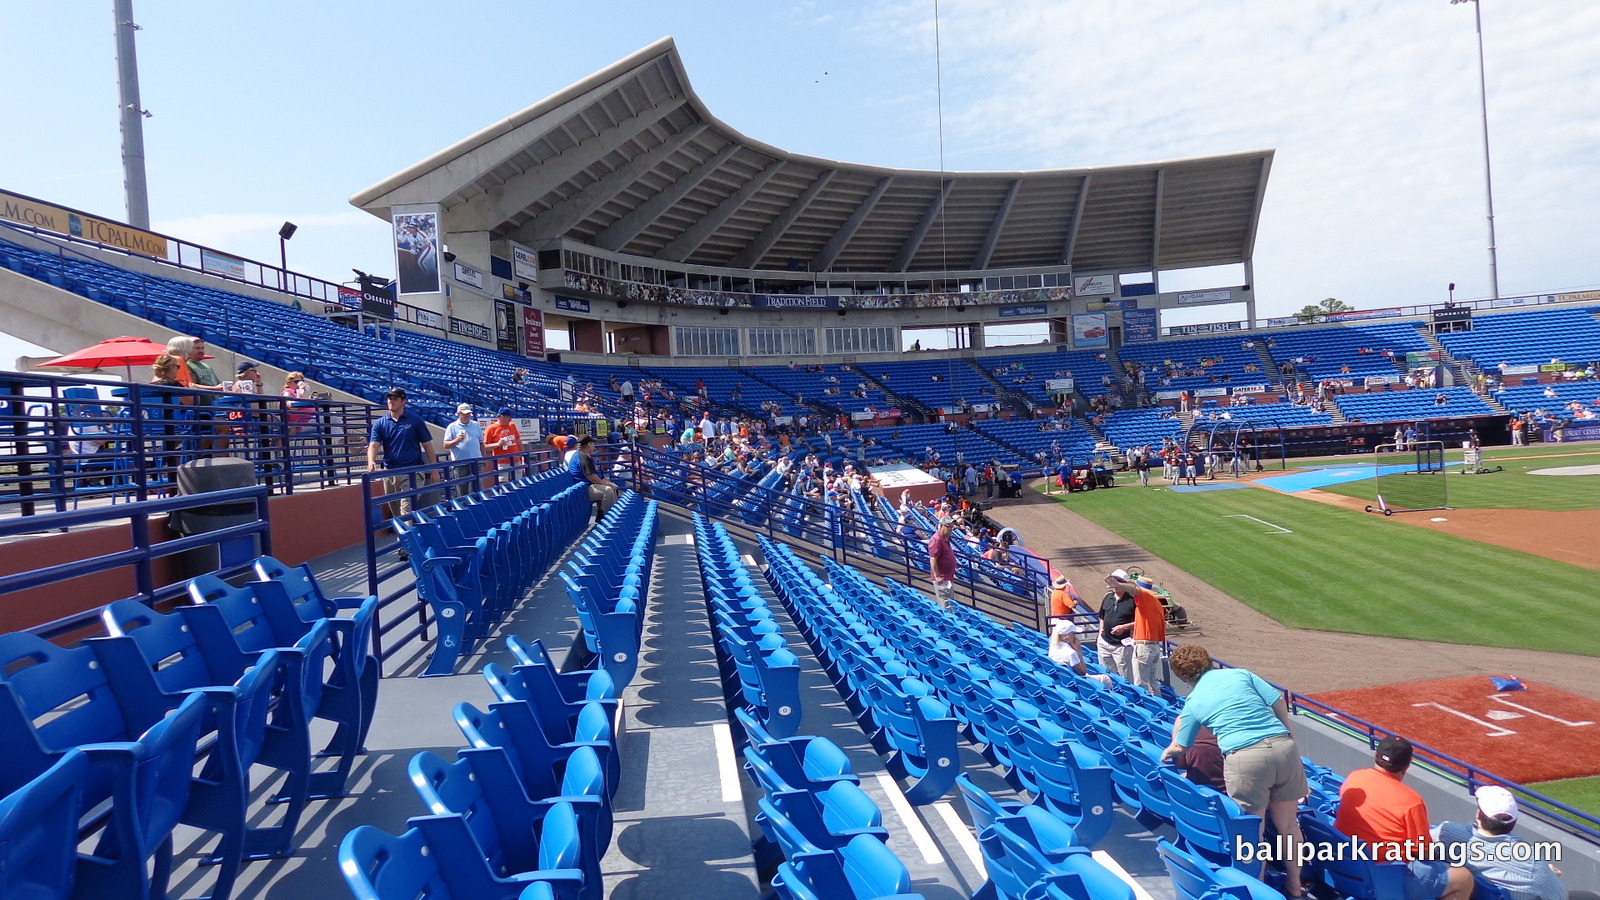 New York Mets to hold free game for fans in Port St. Lucie